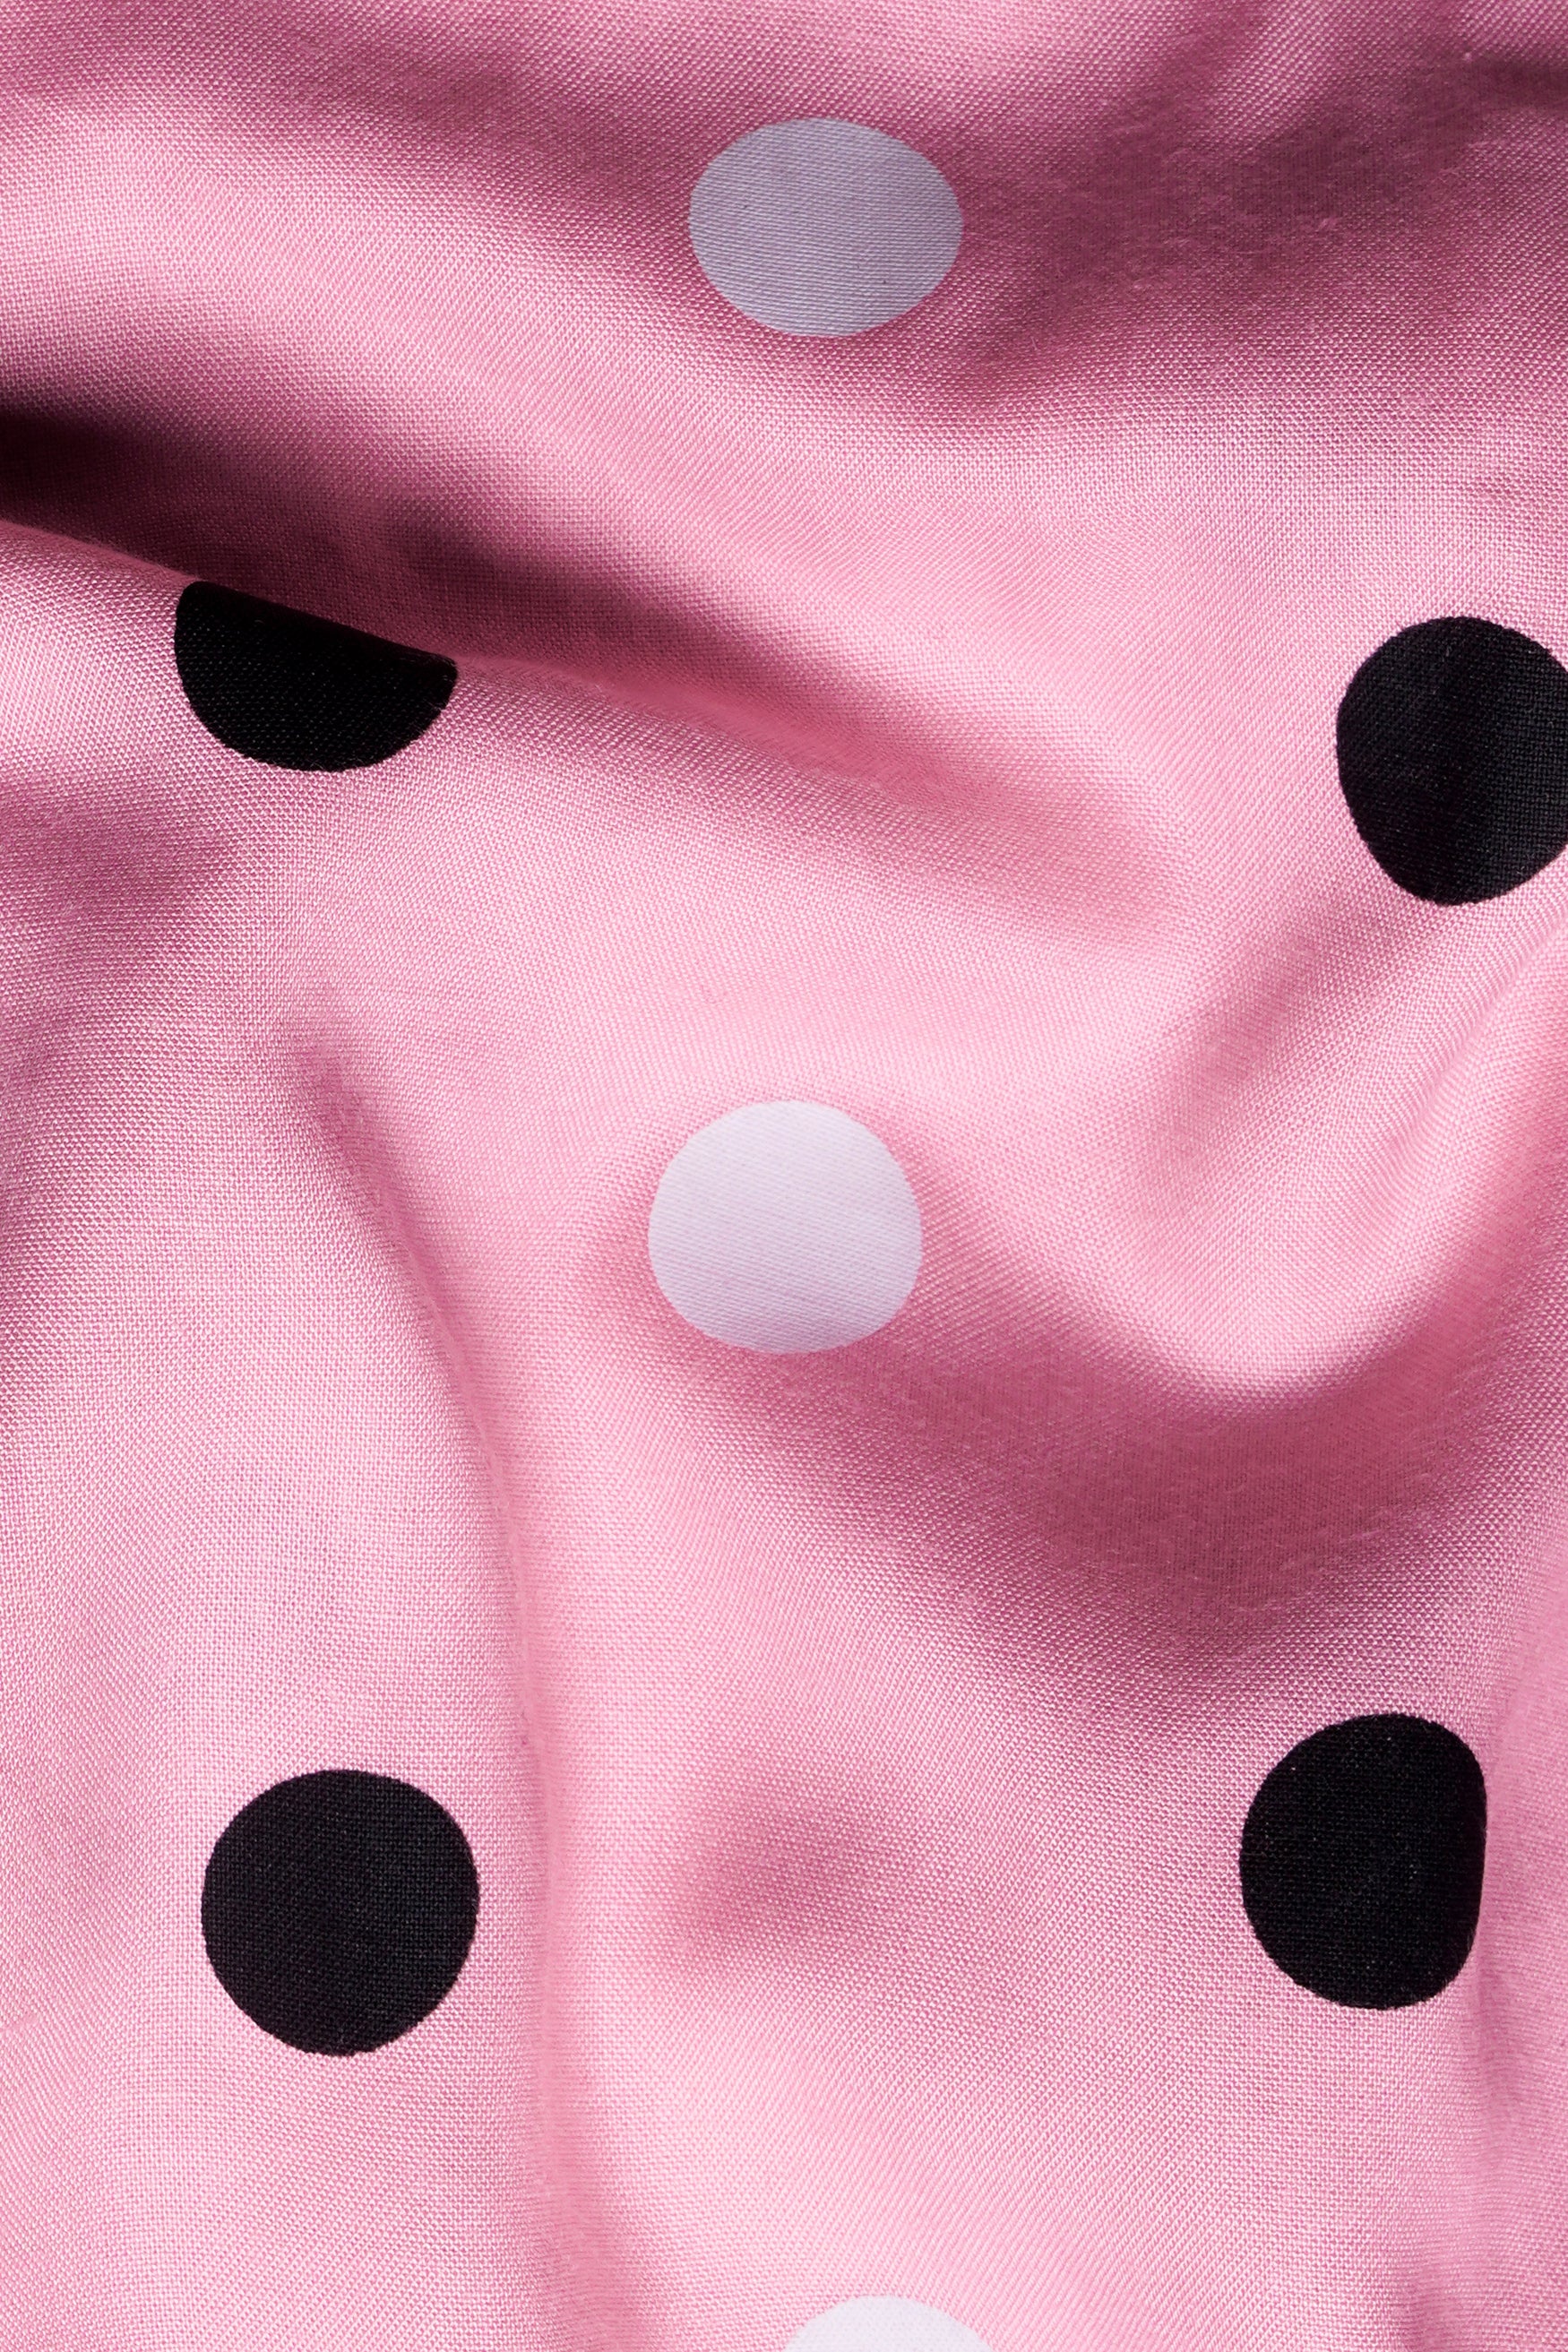 Cadillac Pink with Black and White Polka-Dotted Premium Tencel Shirt 11674-P433-38, 11674-P433-H-38, 11674-P433-39, 11674-P433-H-39, 11674-P433-40, 11674-P433-H-40, 11674-P433-42, 11674-P433-H-42, 11674-P433-44, 11674-P433-H-44, 11674-P433-46, 11674-P433-H-46, 11674-P433-48, 11674-P433-H-48, 11674-P433-50, 11674-P433-H-50, 11674-P433-52, 11674-P433-H-52